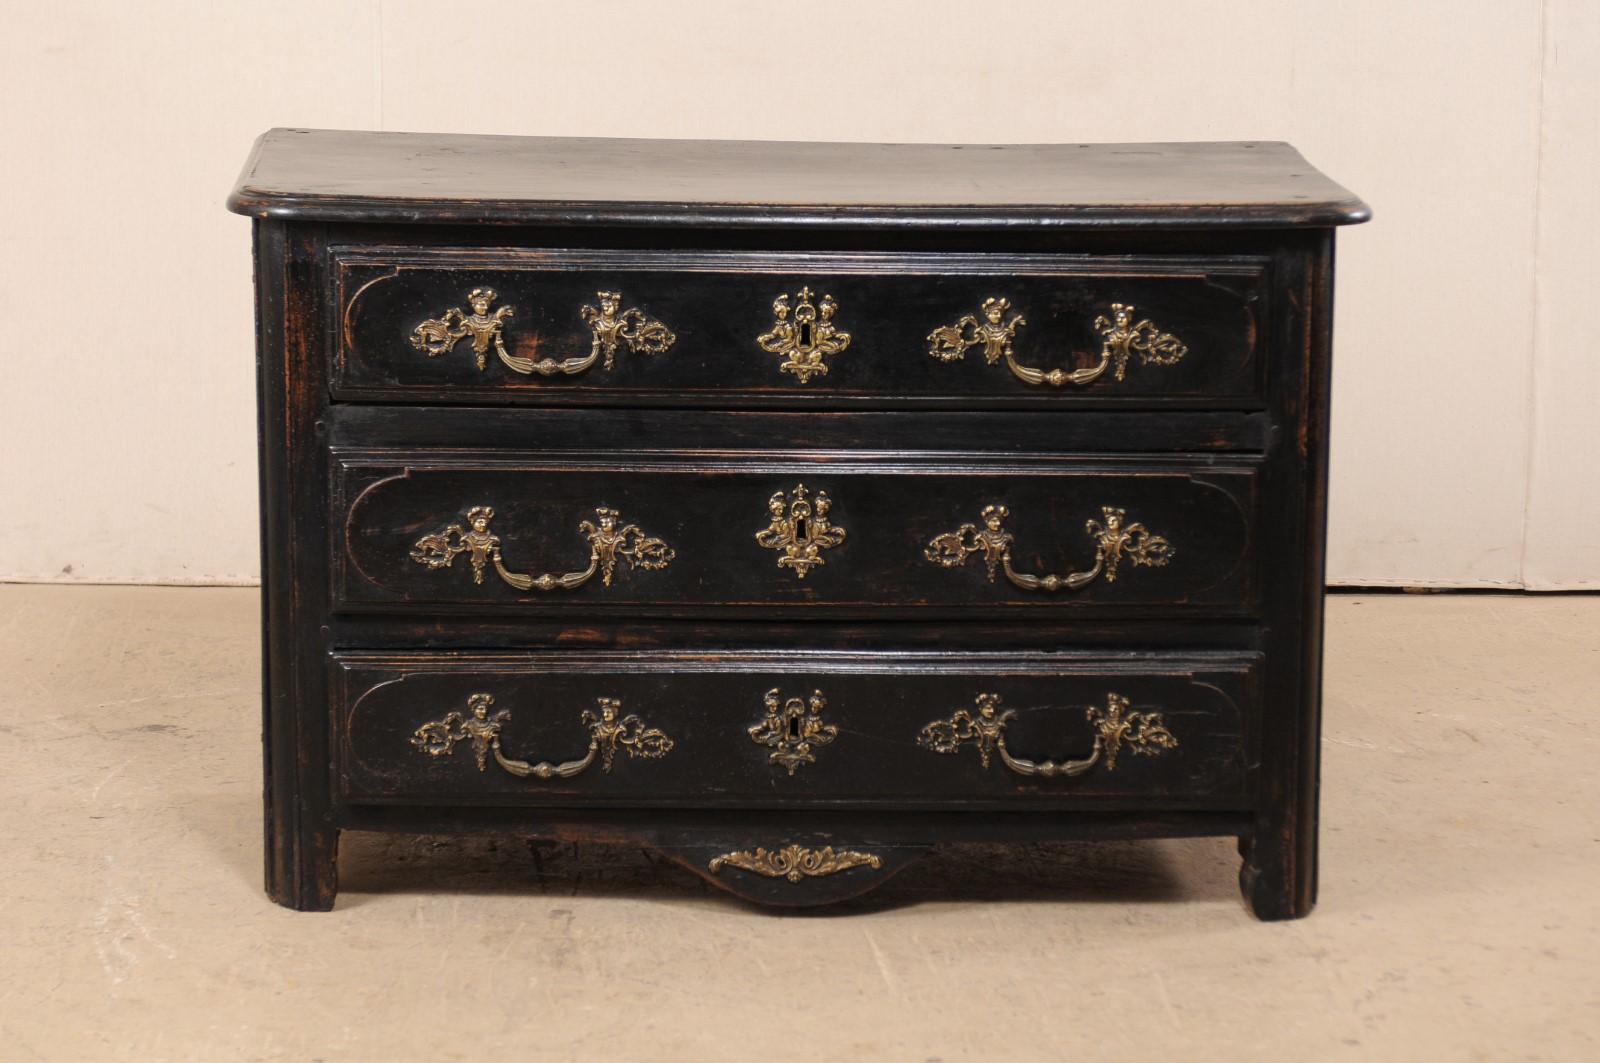 An 18th century French three-drawer wood chest. This antique chest from France has a rectangular-shaped top with curved front corners, which slightly overhands the case below which houses three full-sized, graduated doors. Drawers are flanked with